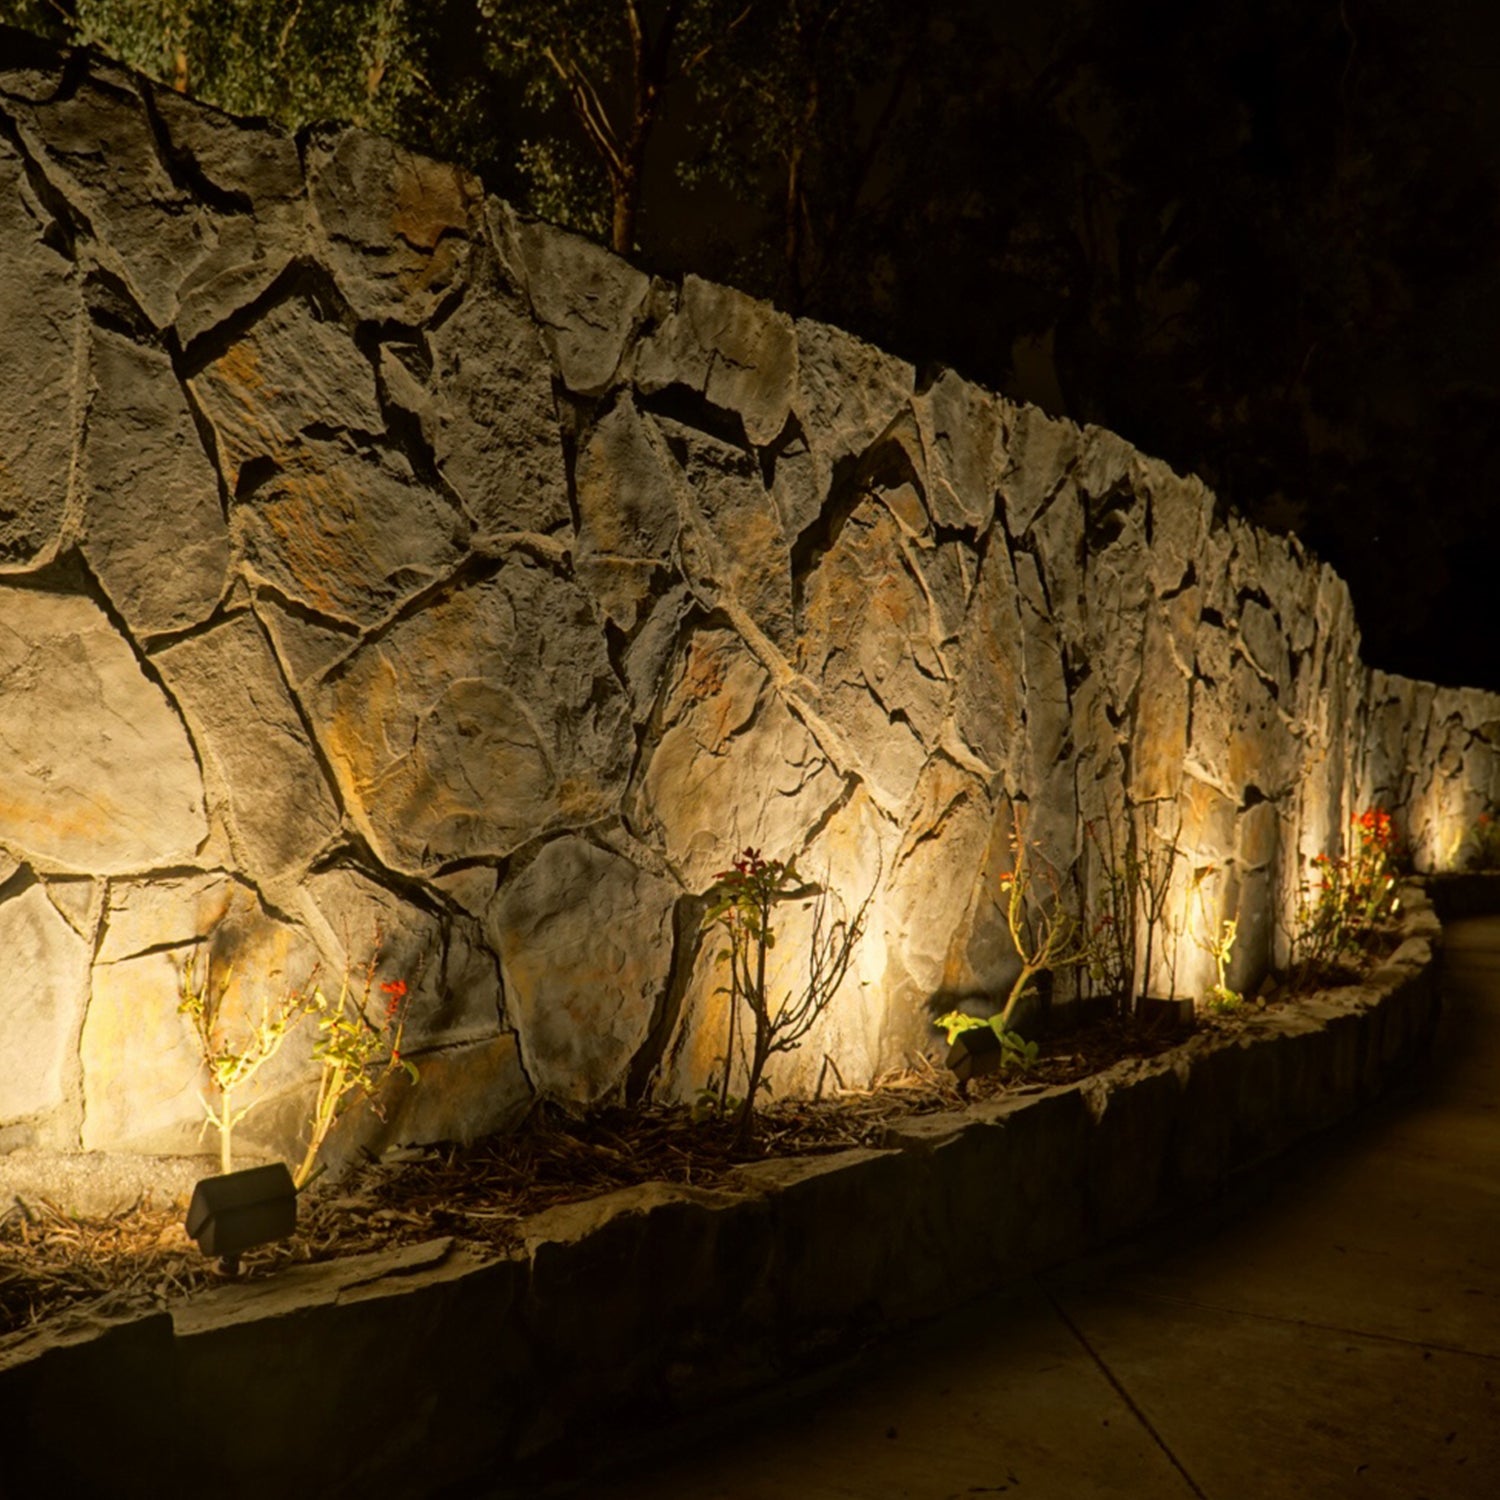 Outdoor stone wall illuminated by LED landscape lights at night, highlighting texture and surrounding plants